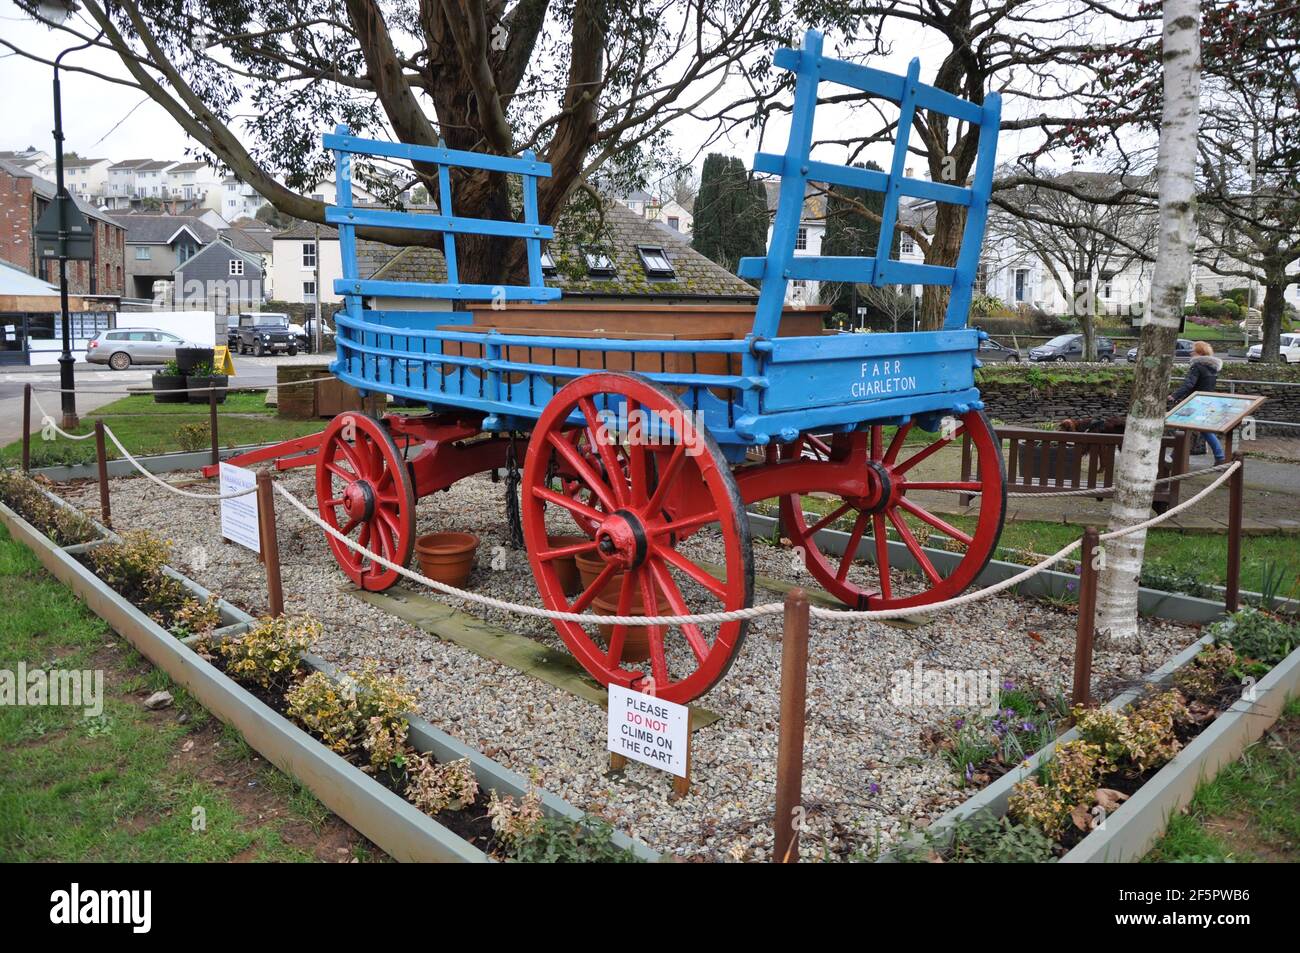 A colourful wooden cart in Dartmouth, UK Stock Photo